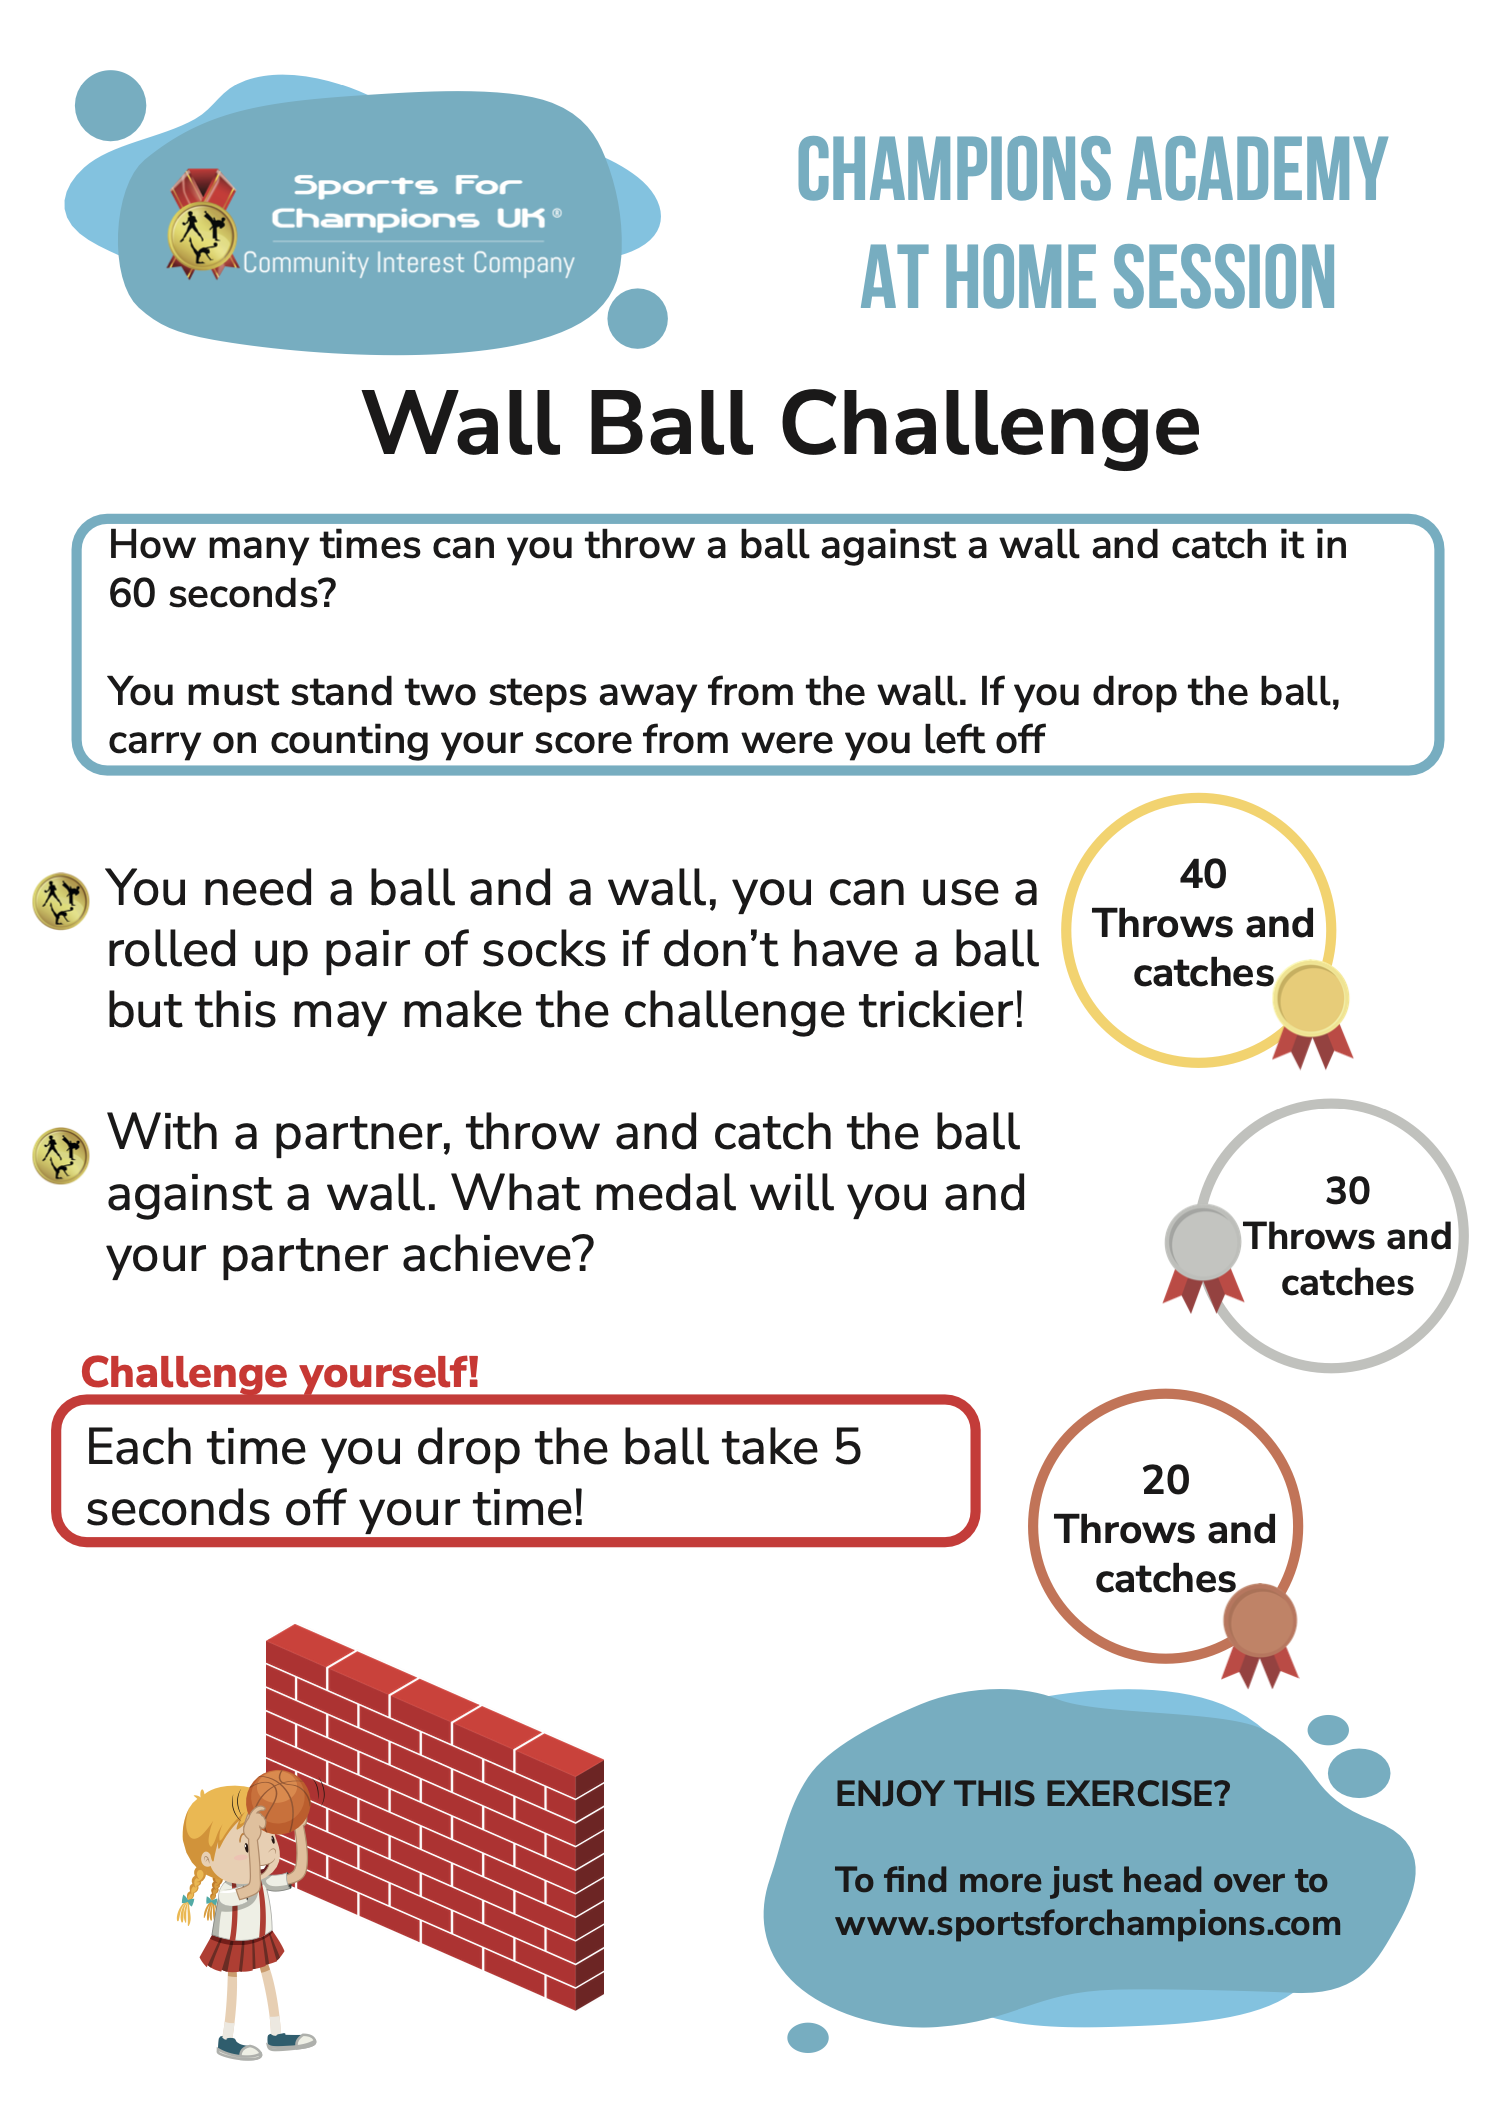 Wall Ball at home fitness session